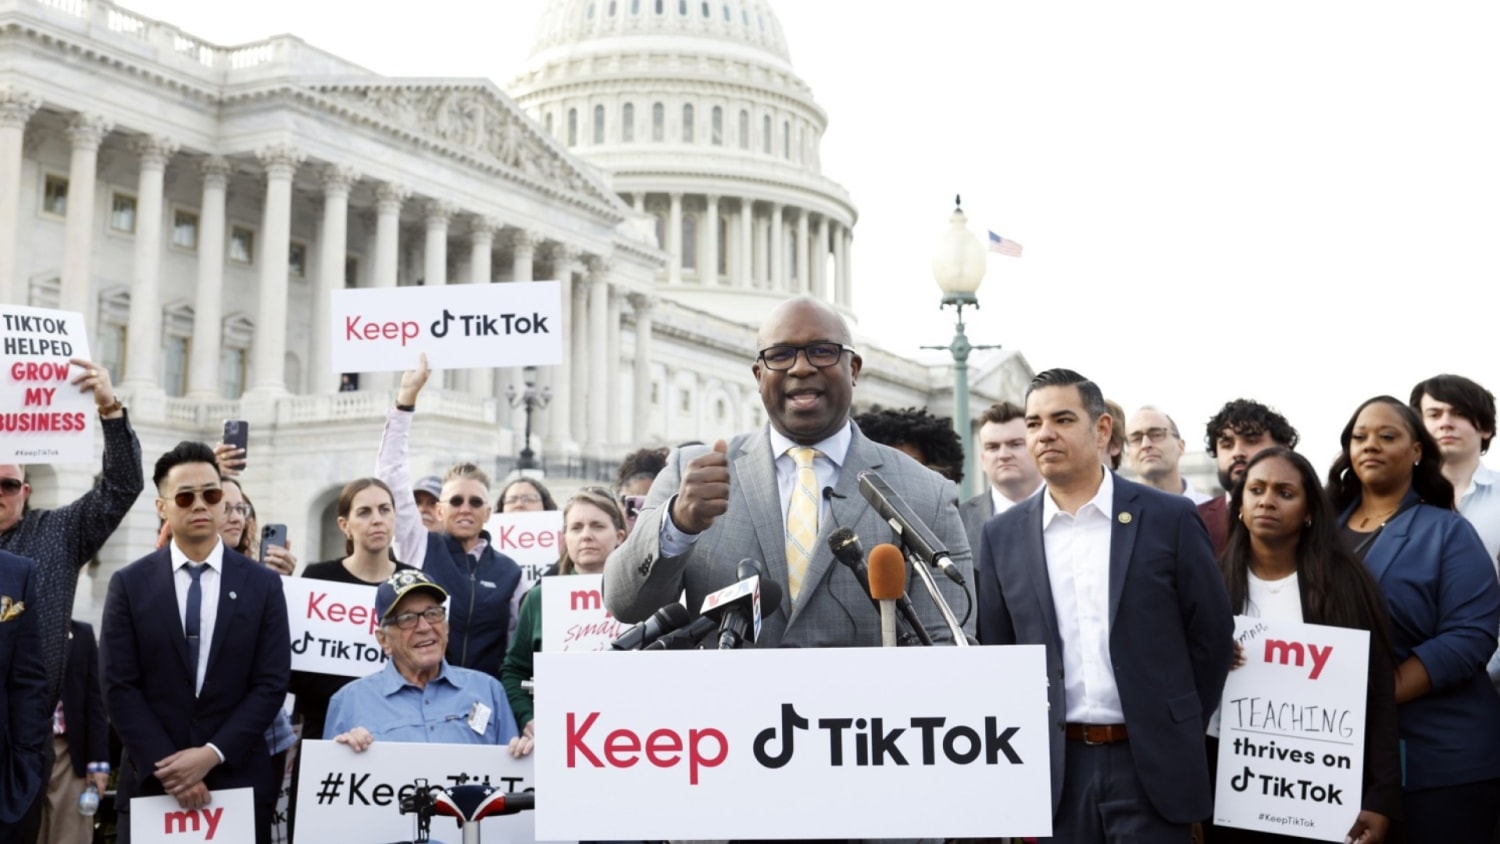 Omnibus bill bans TikTok on government phones just as the app is